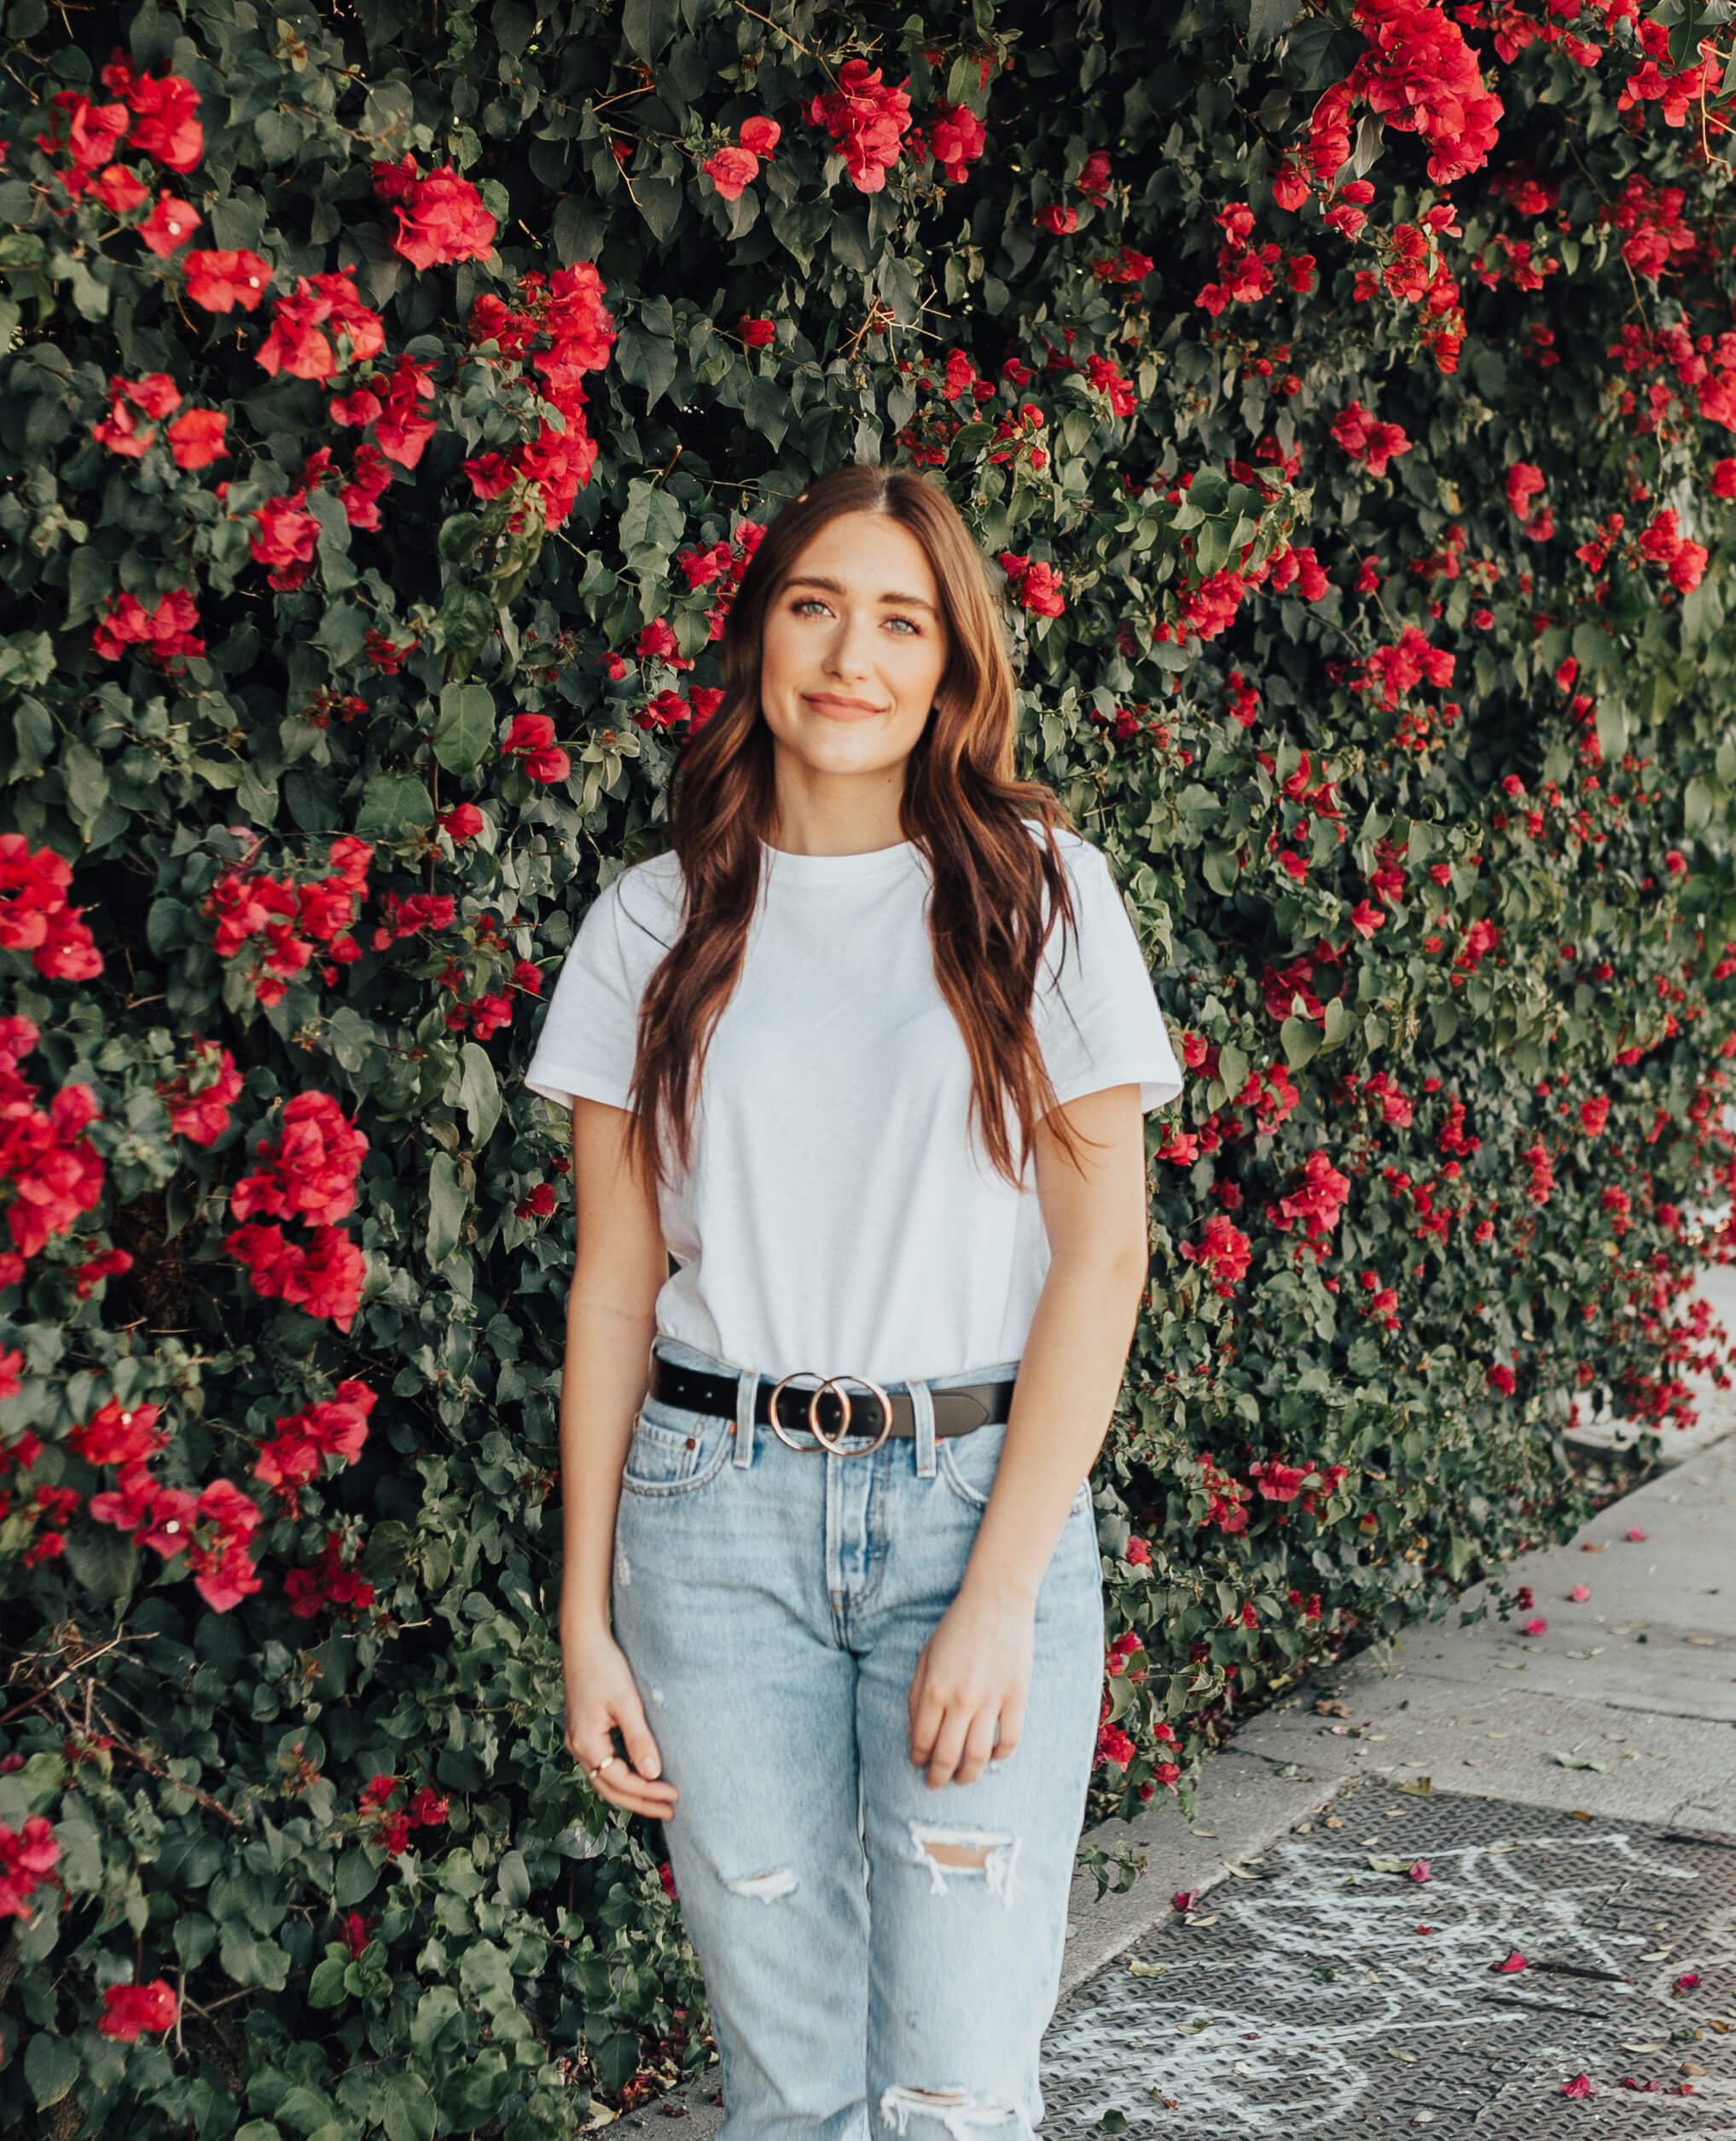 How To Style A White T-Shirt | Twinspiration